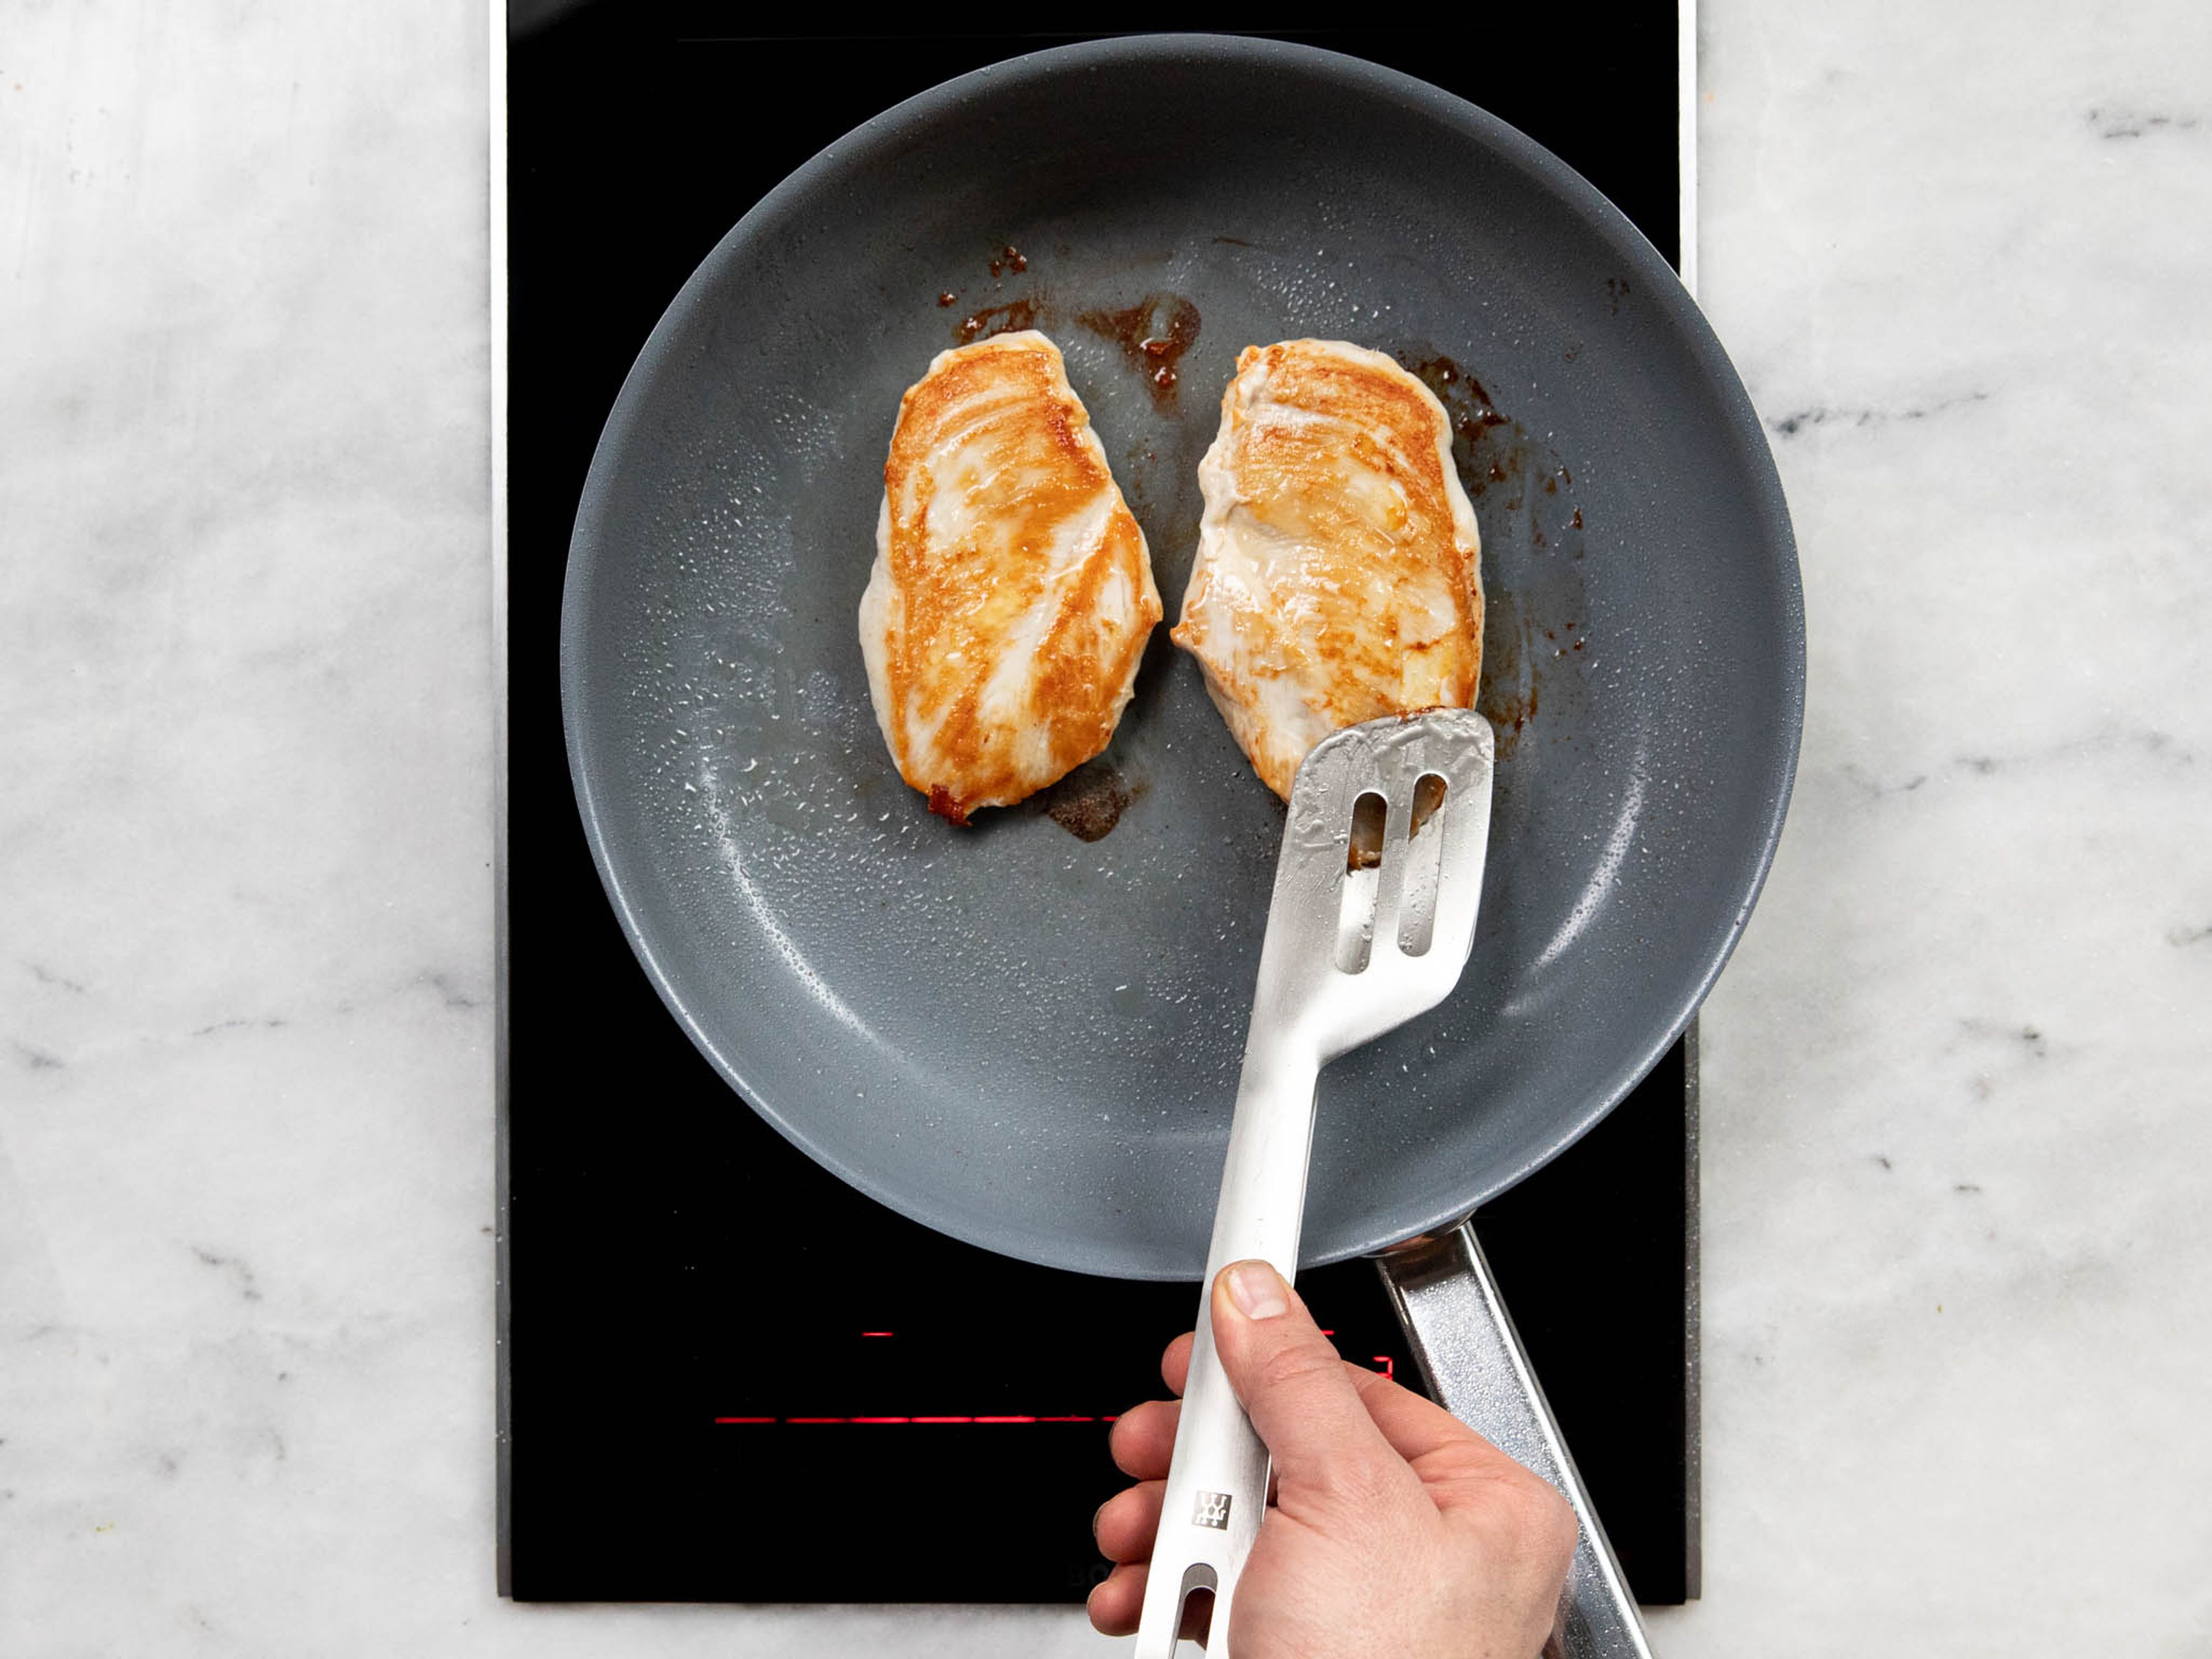 Heat a frying pan over medium heat. Add vegetable oil and fry chicken breasts for approx. 4 min., then flip and fry another 4 min., or until cooked through. Season with salt and pepper. Remove, let cool for a few minutes, then slice.